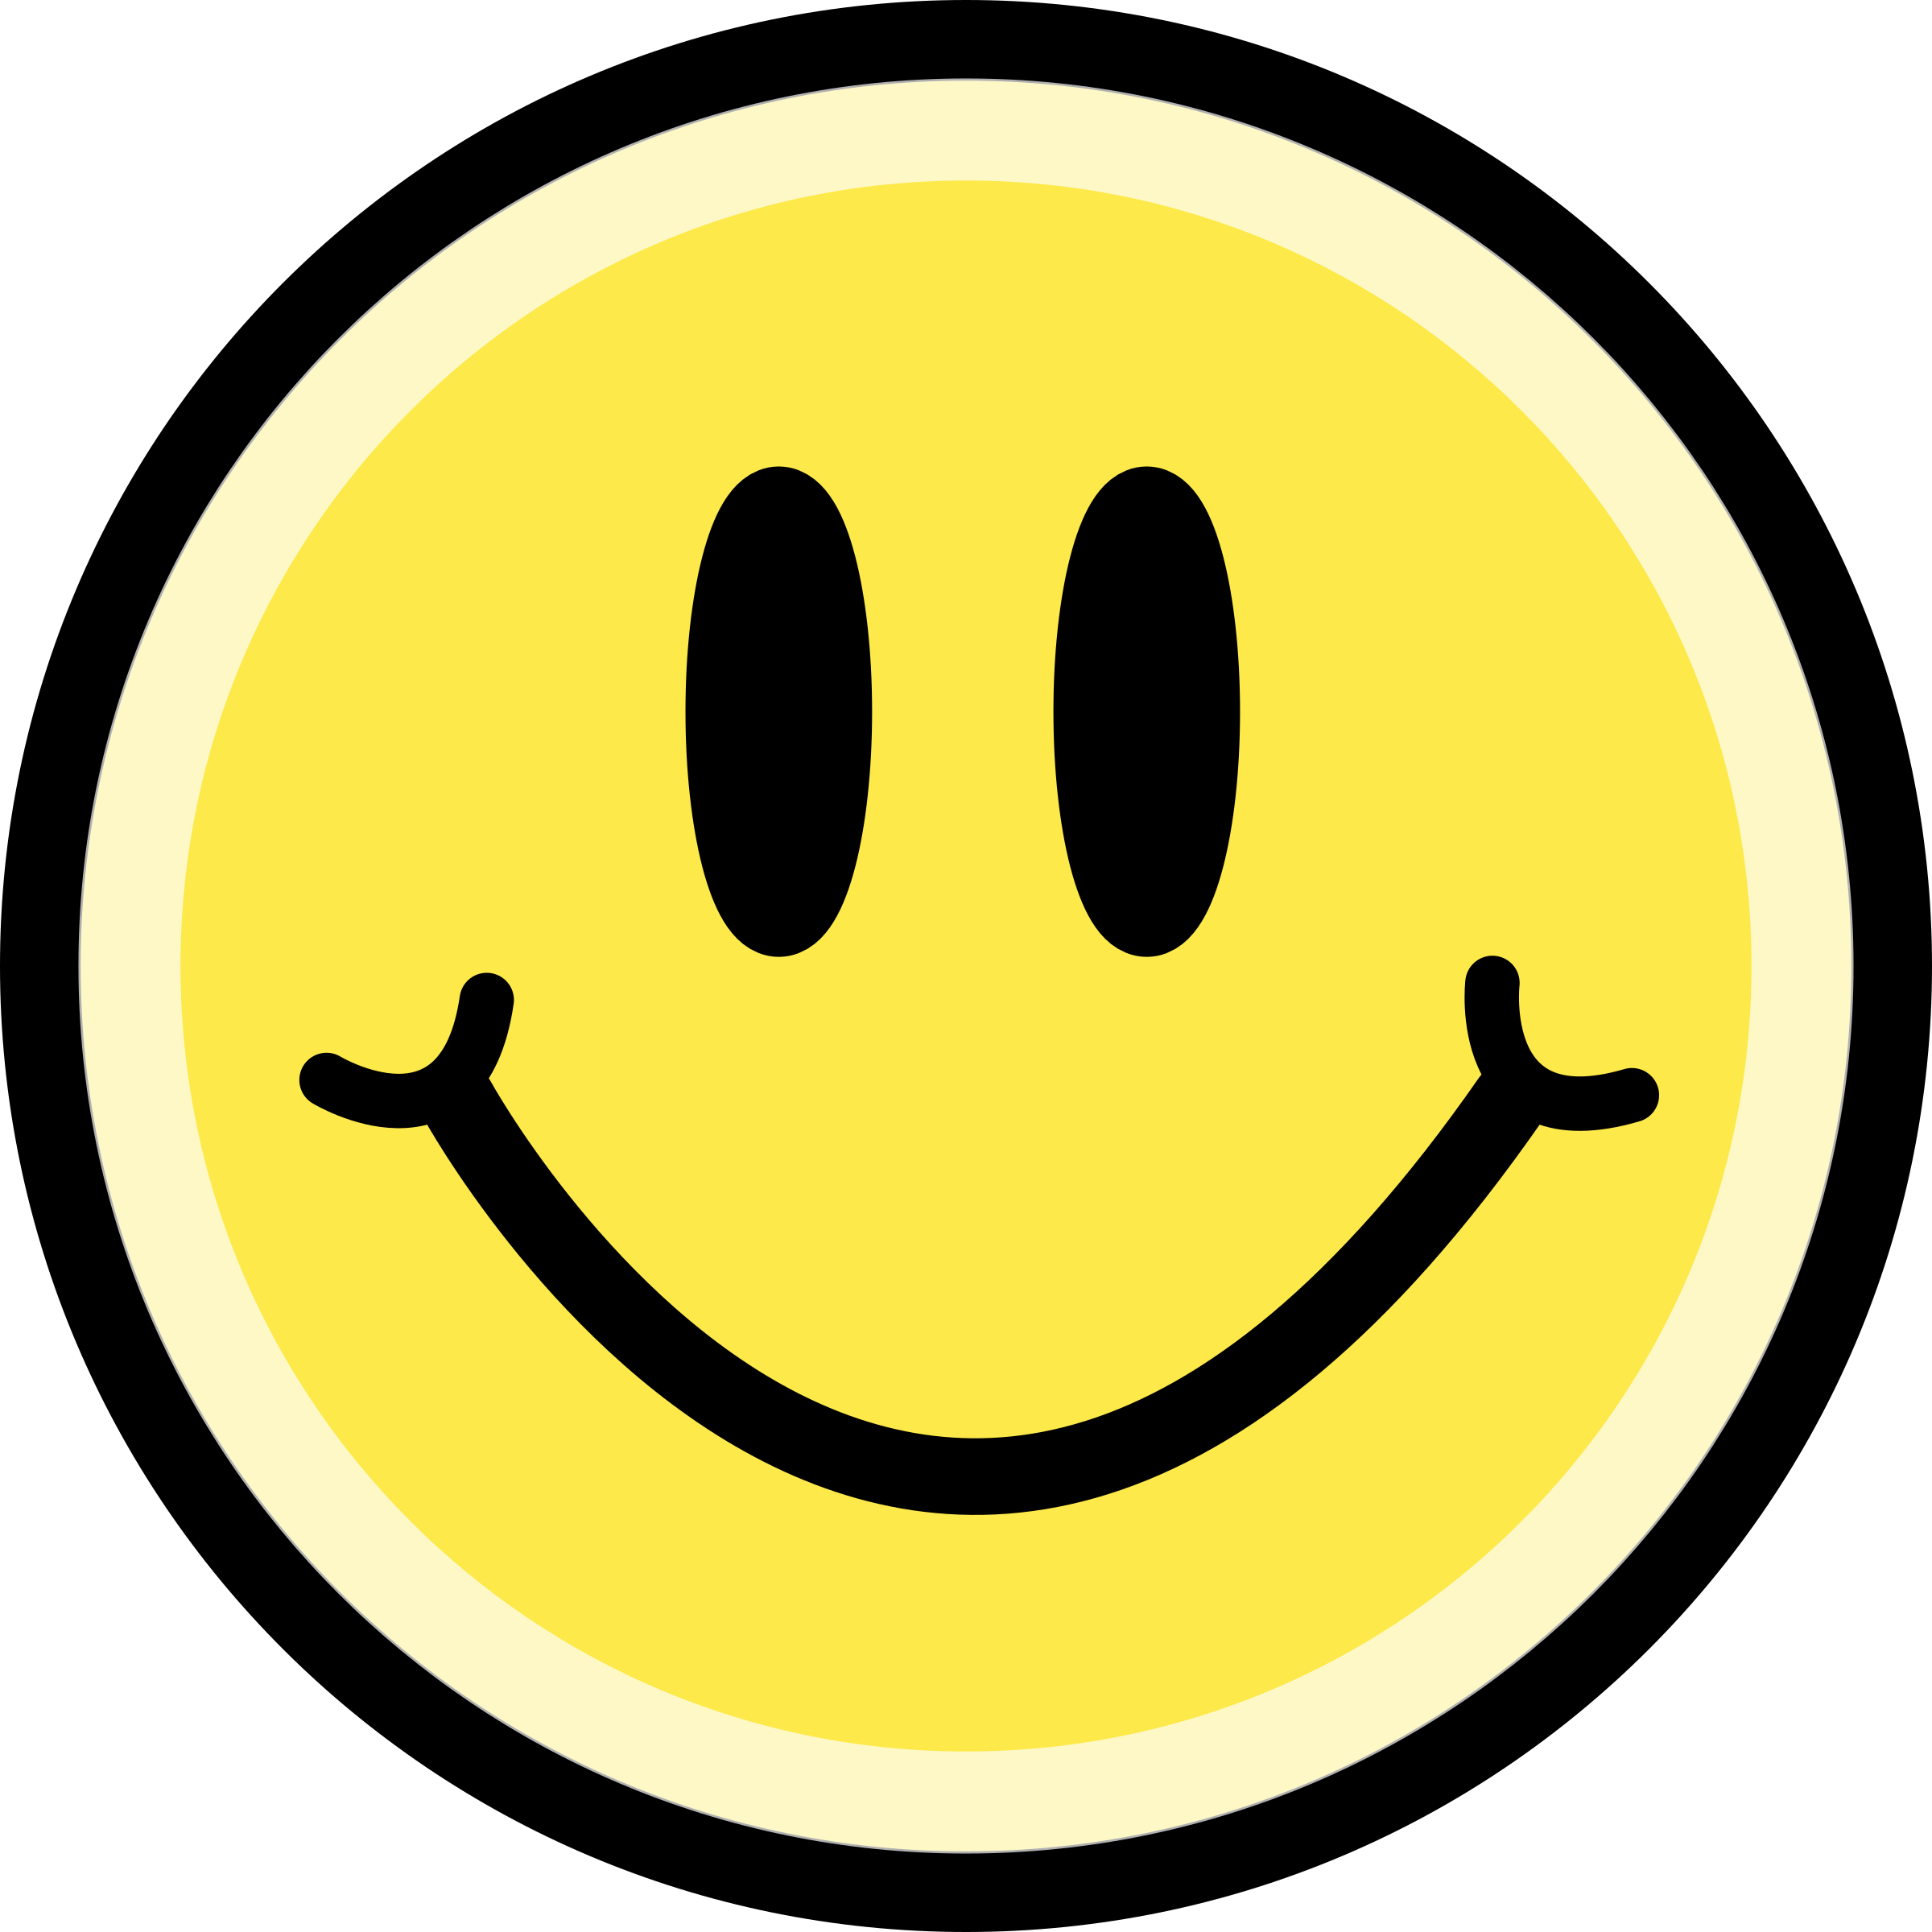 Smiley Looking Happy Png Image Purepng Free Transparent Cc0 Png